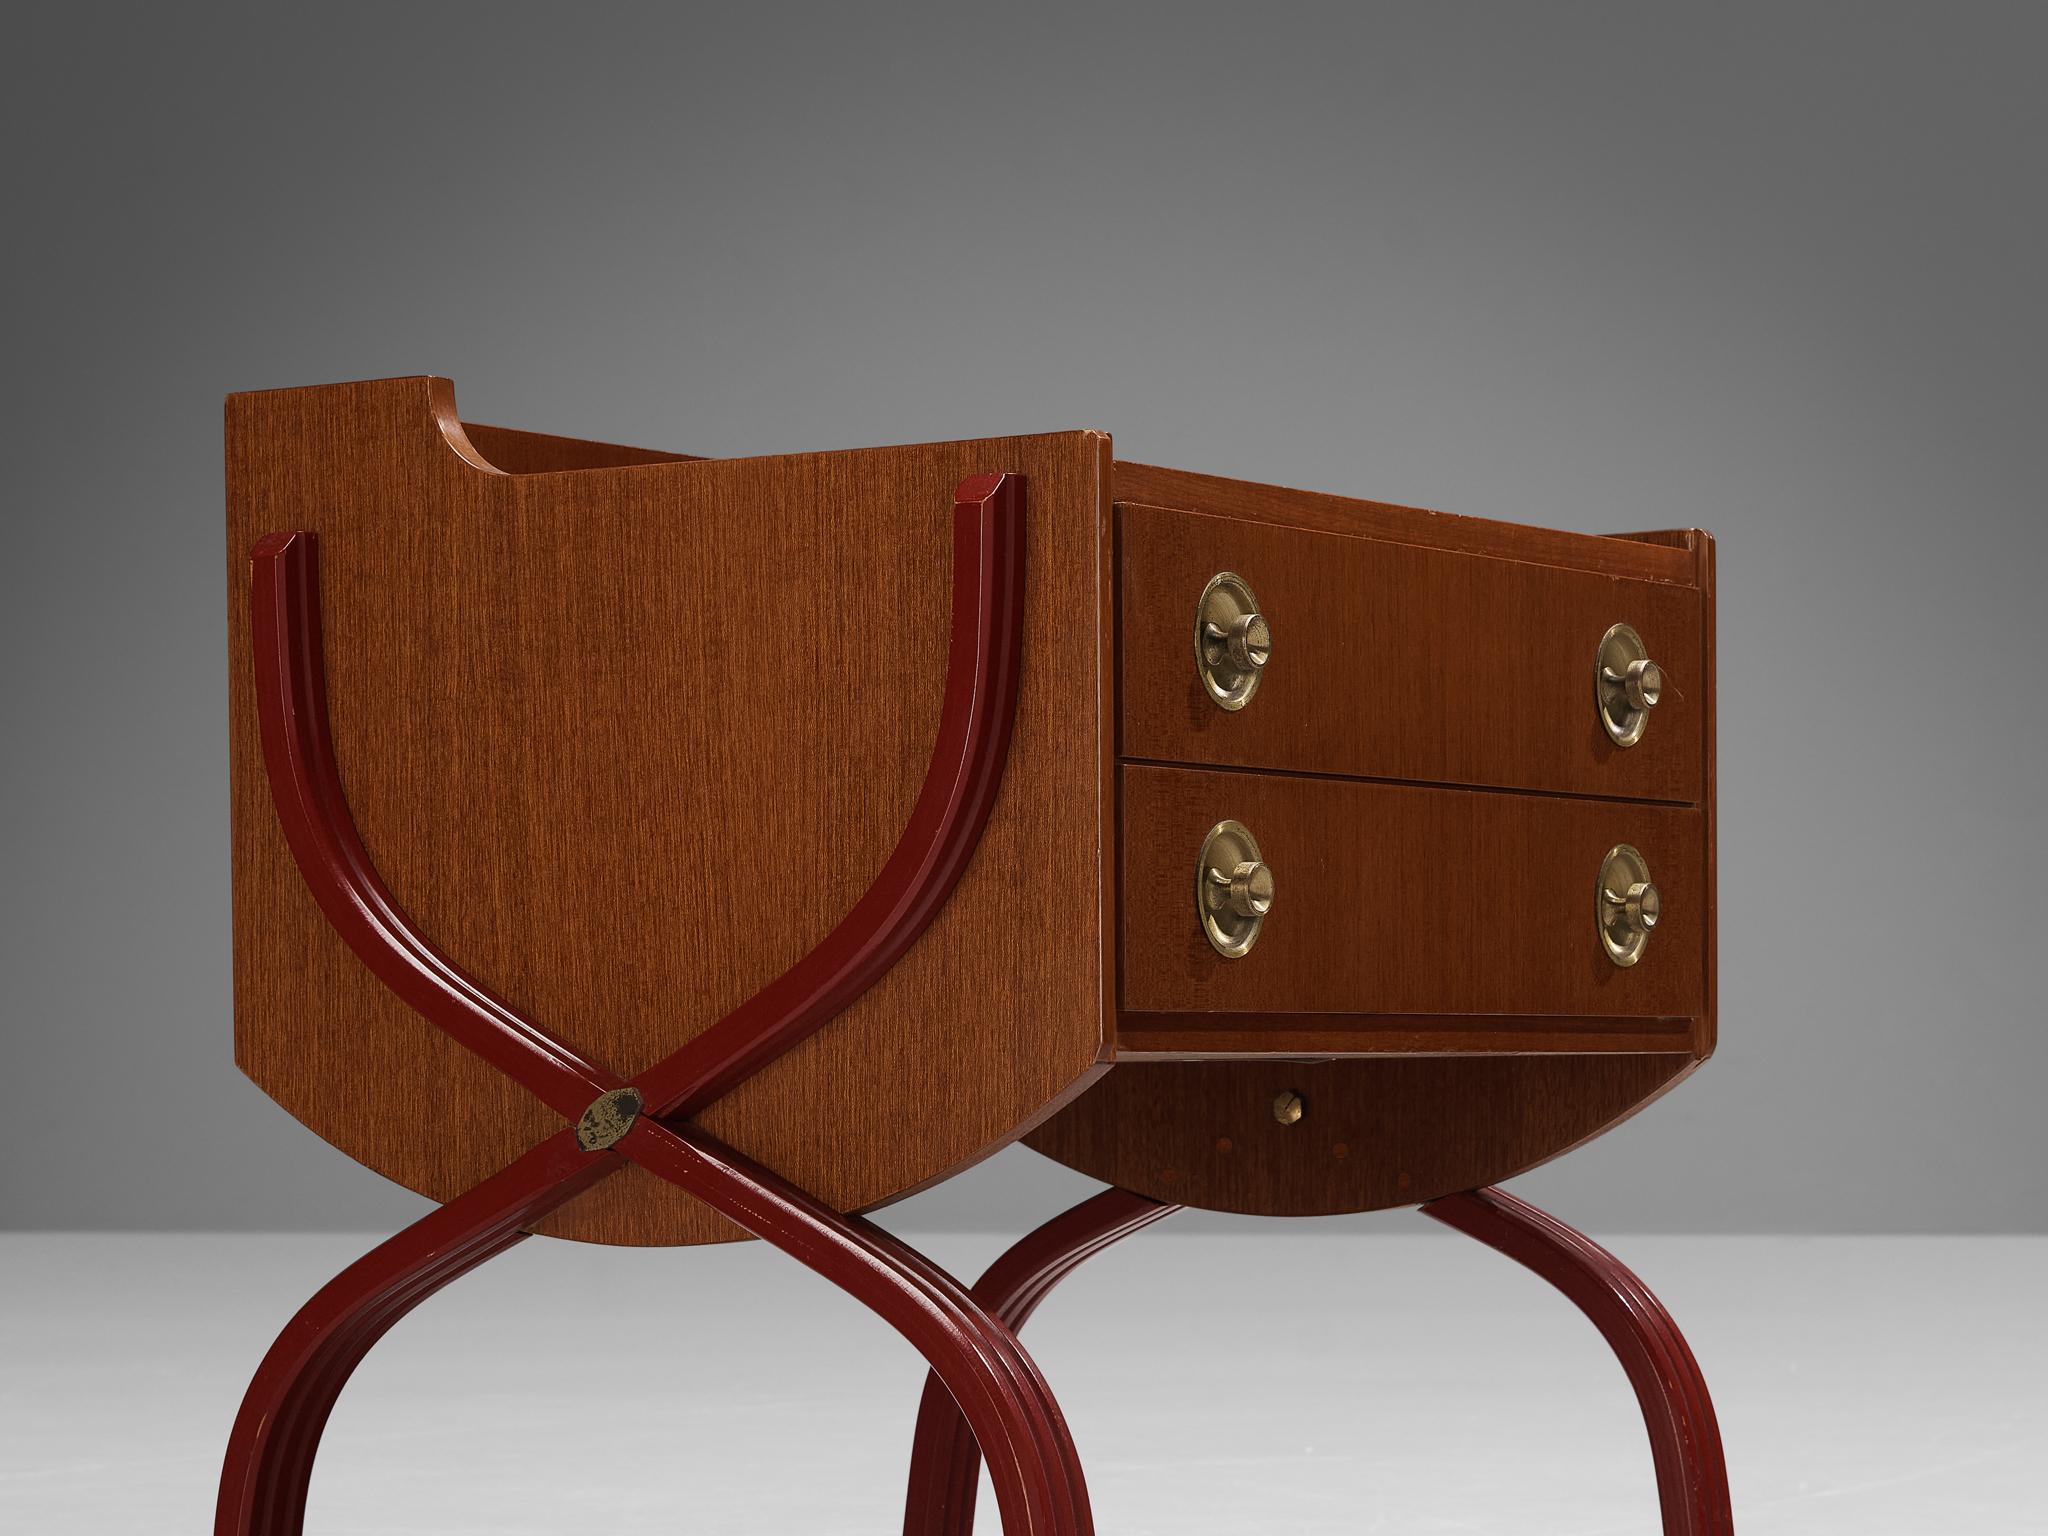  Tosi Arredamenti Pair of Cabinets or Night Stands in Mahogany and Brass  For Sale 5